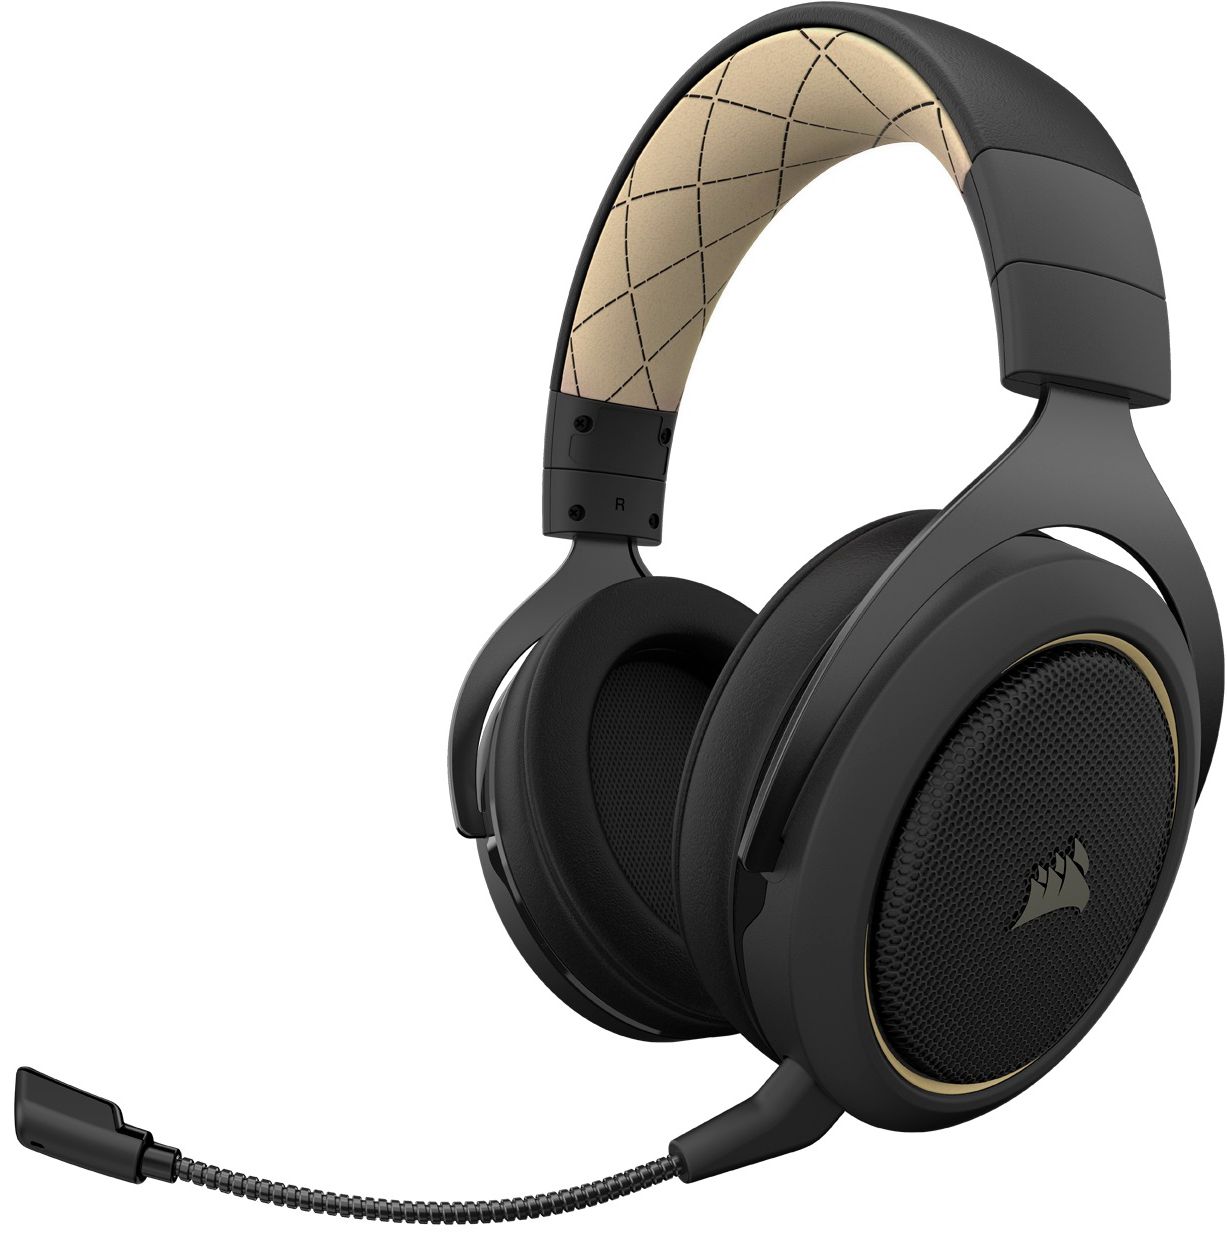 Angle View: CORSAIR - HS70 PRO Wireless 7.1 Surround Sound Gaming Headset for PC, PS5, and PS4 - Cream